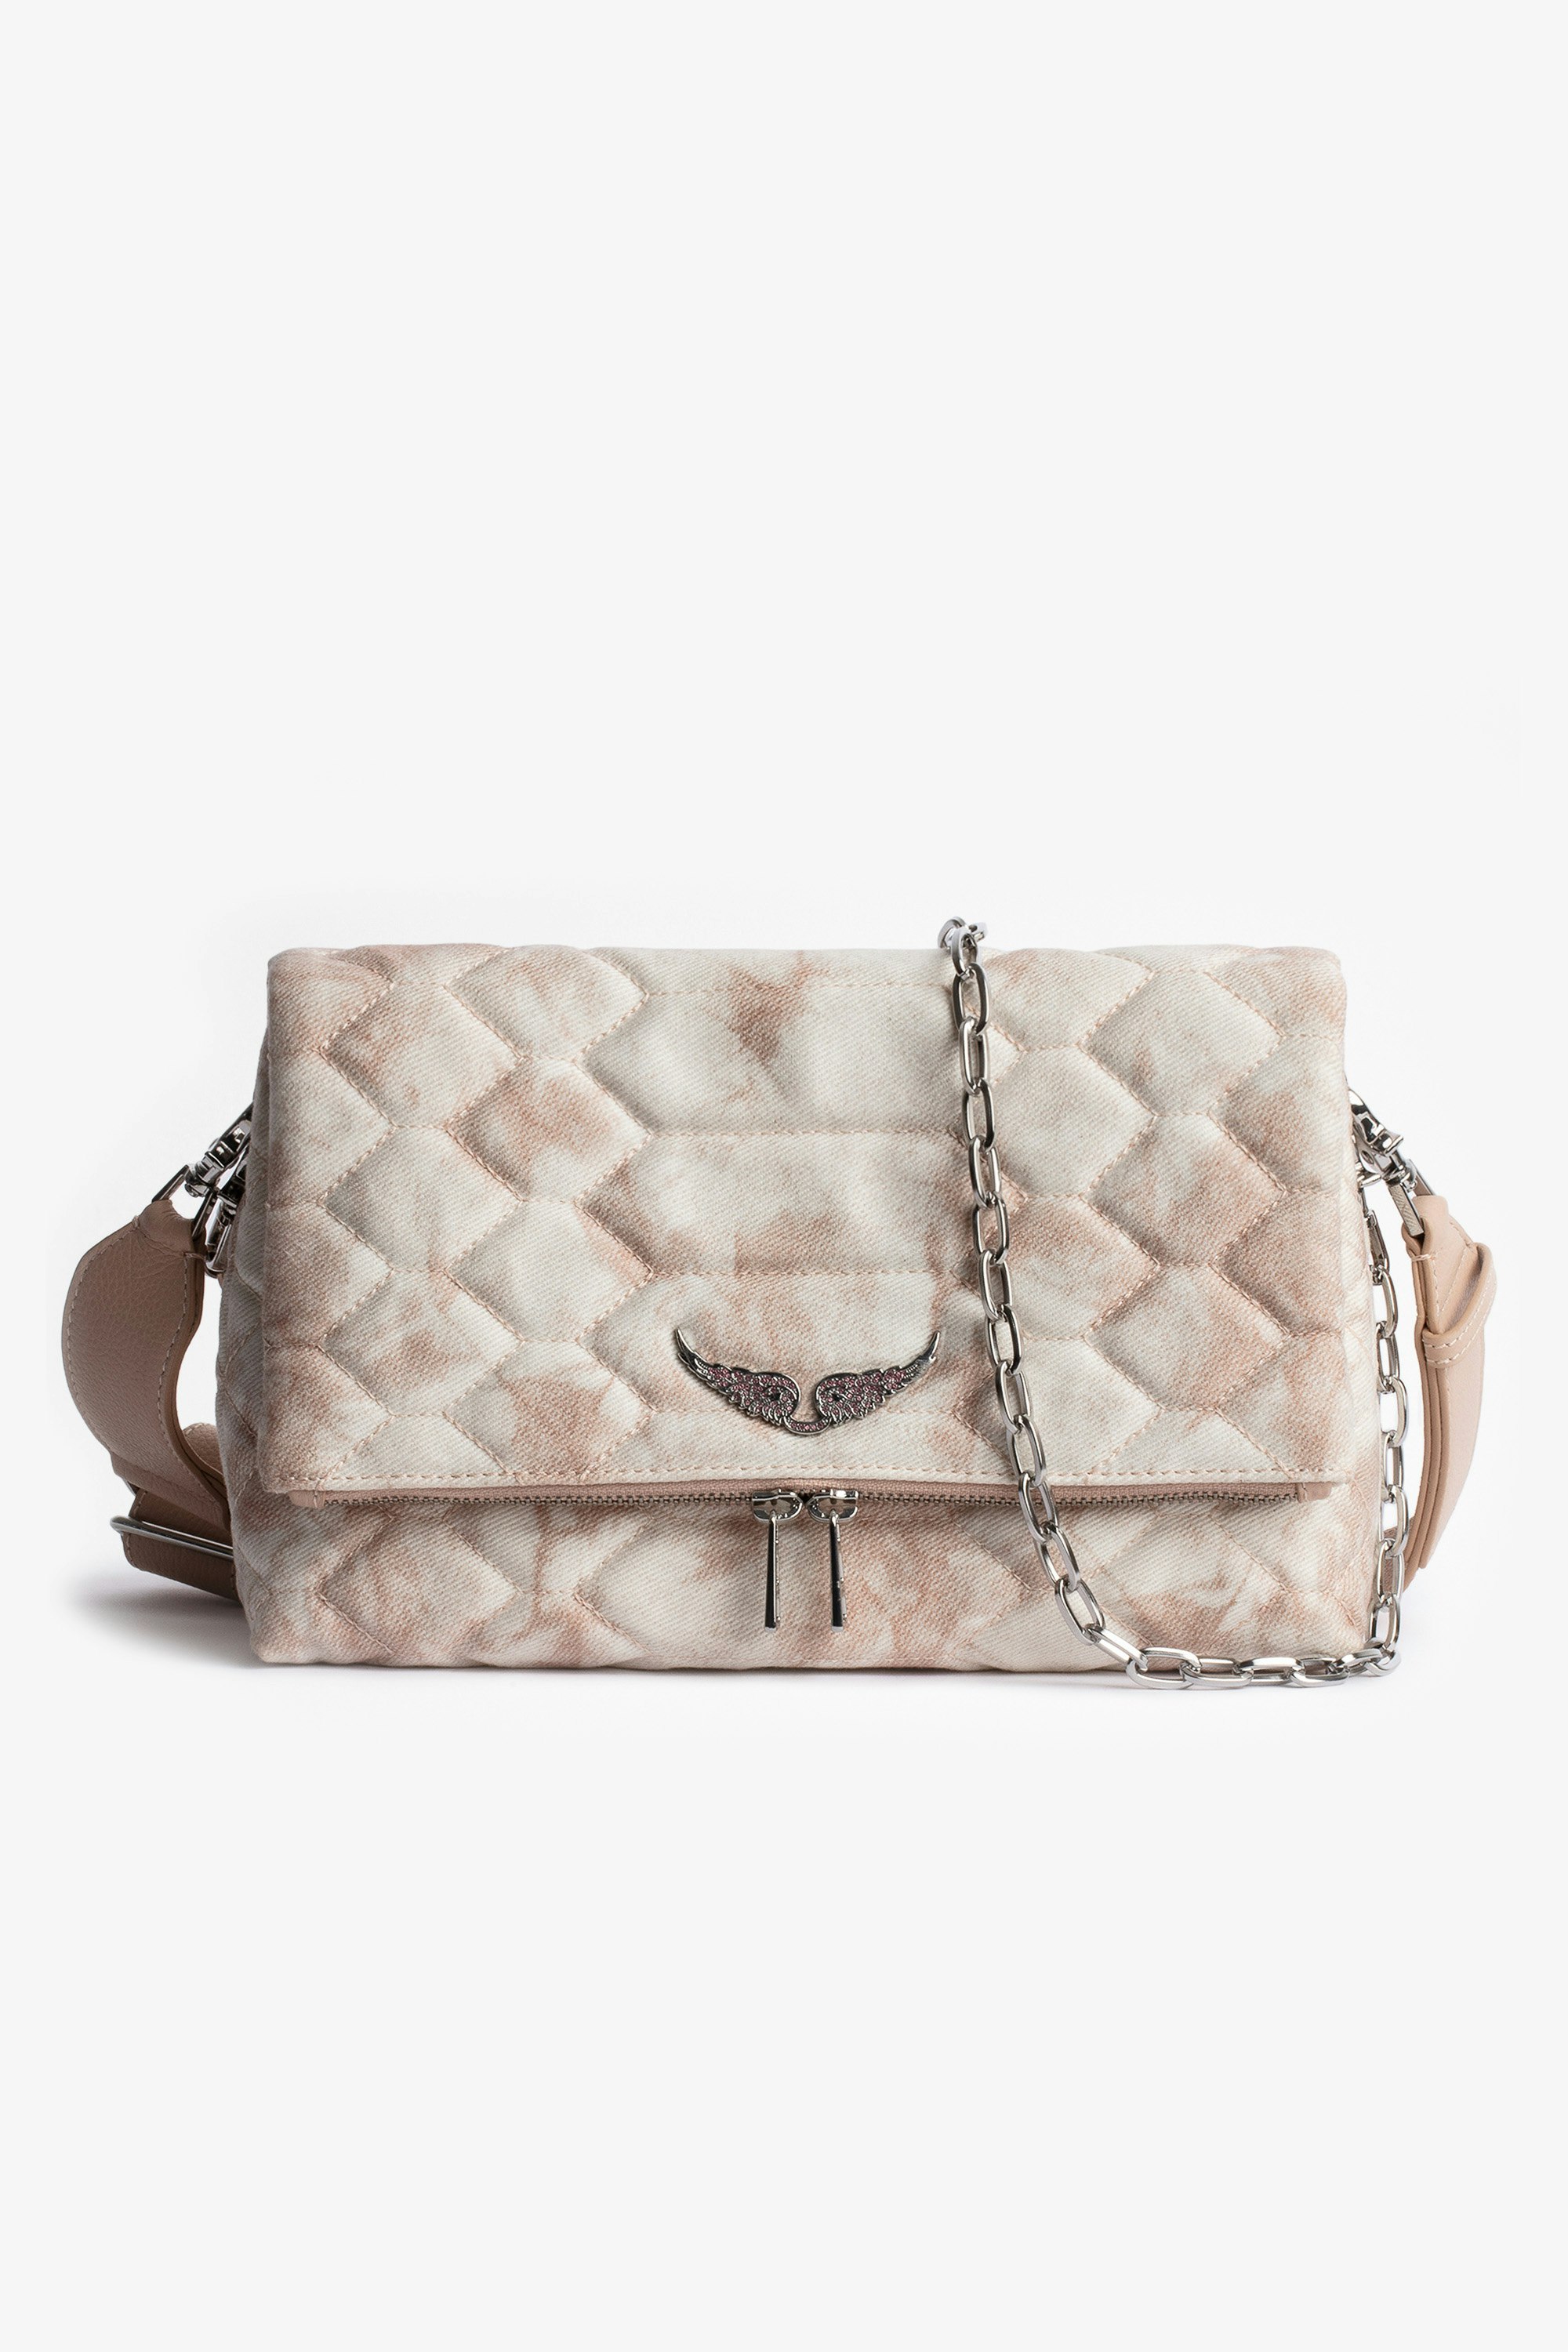 Rocky バッグ Women's quilted and faded ecru clutch bag